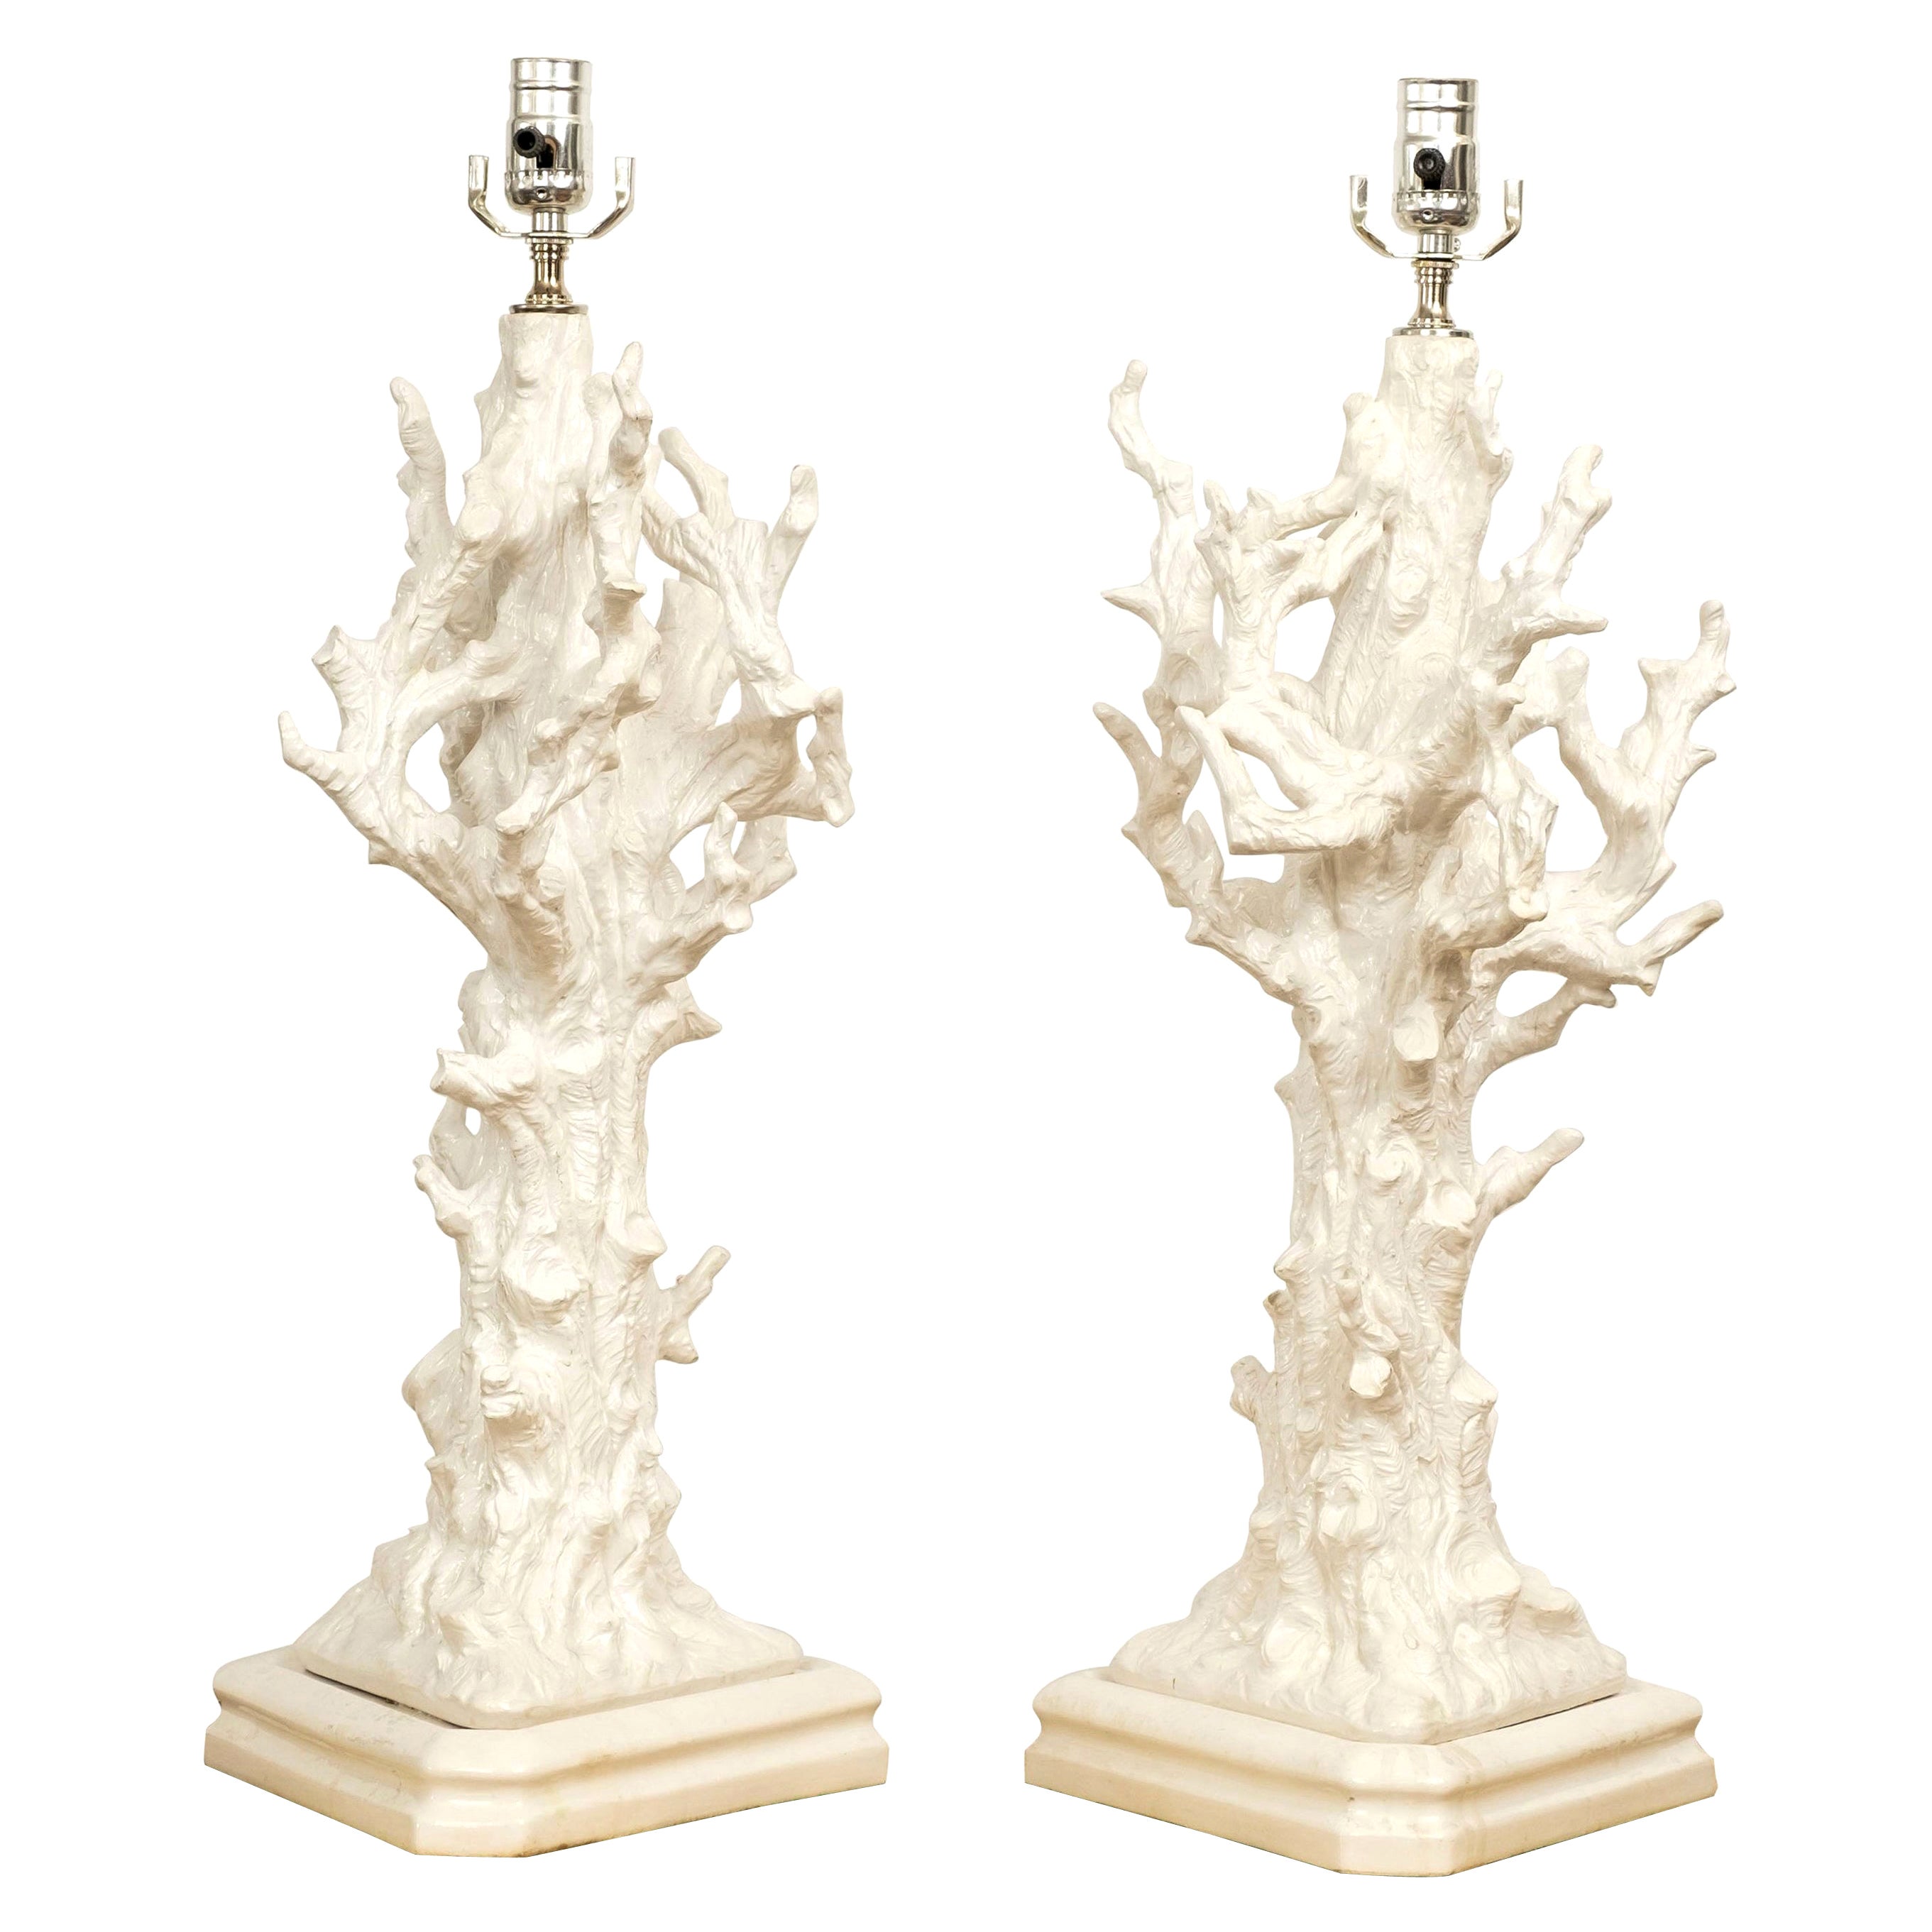 Pair of Italian White Glazed Porcelain Faux Coral Lamps